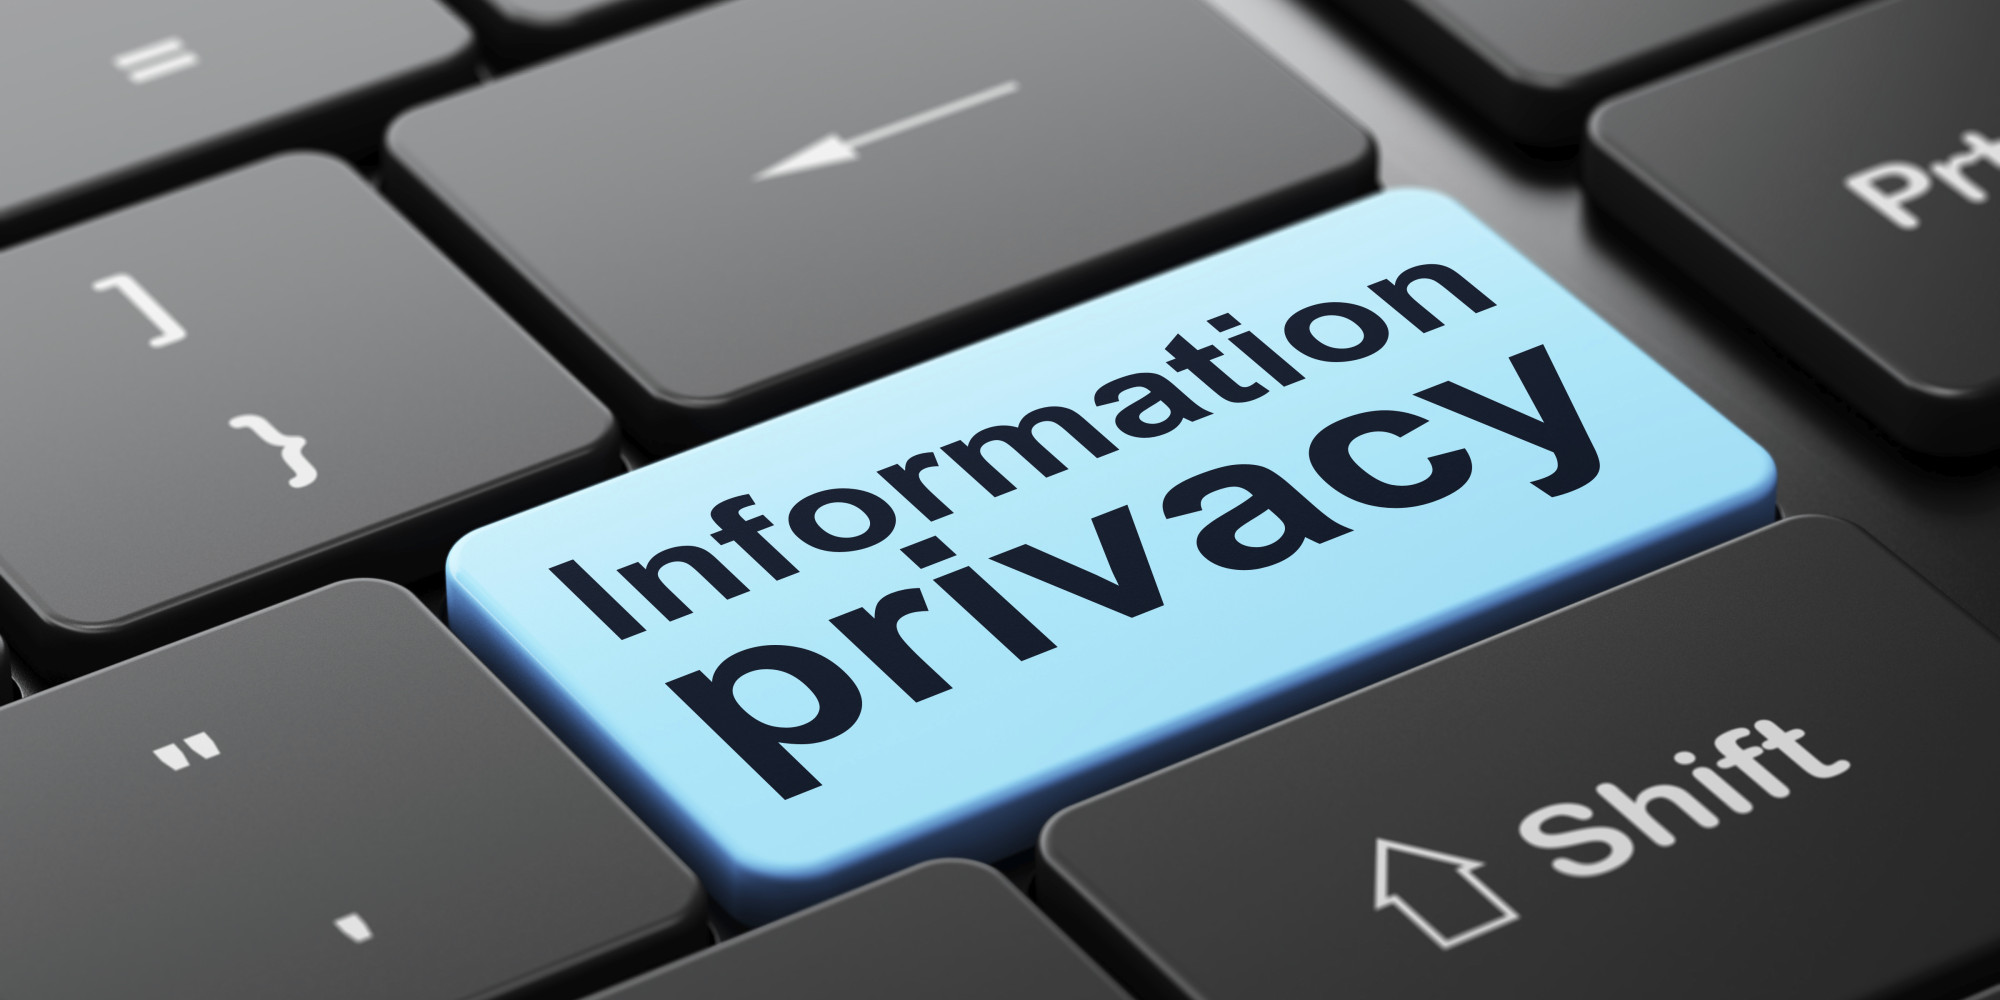 The dangers of eroding privacy